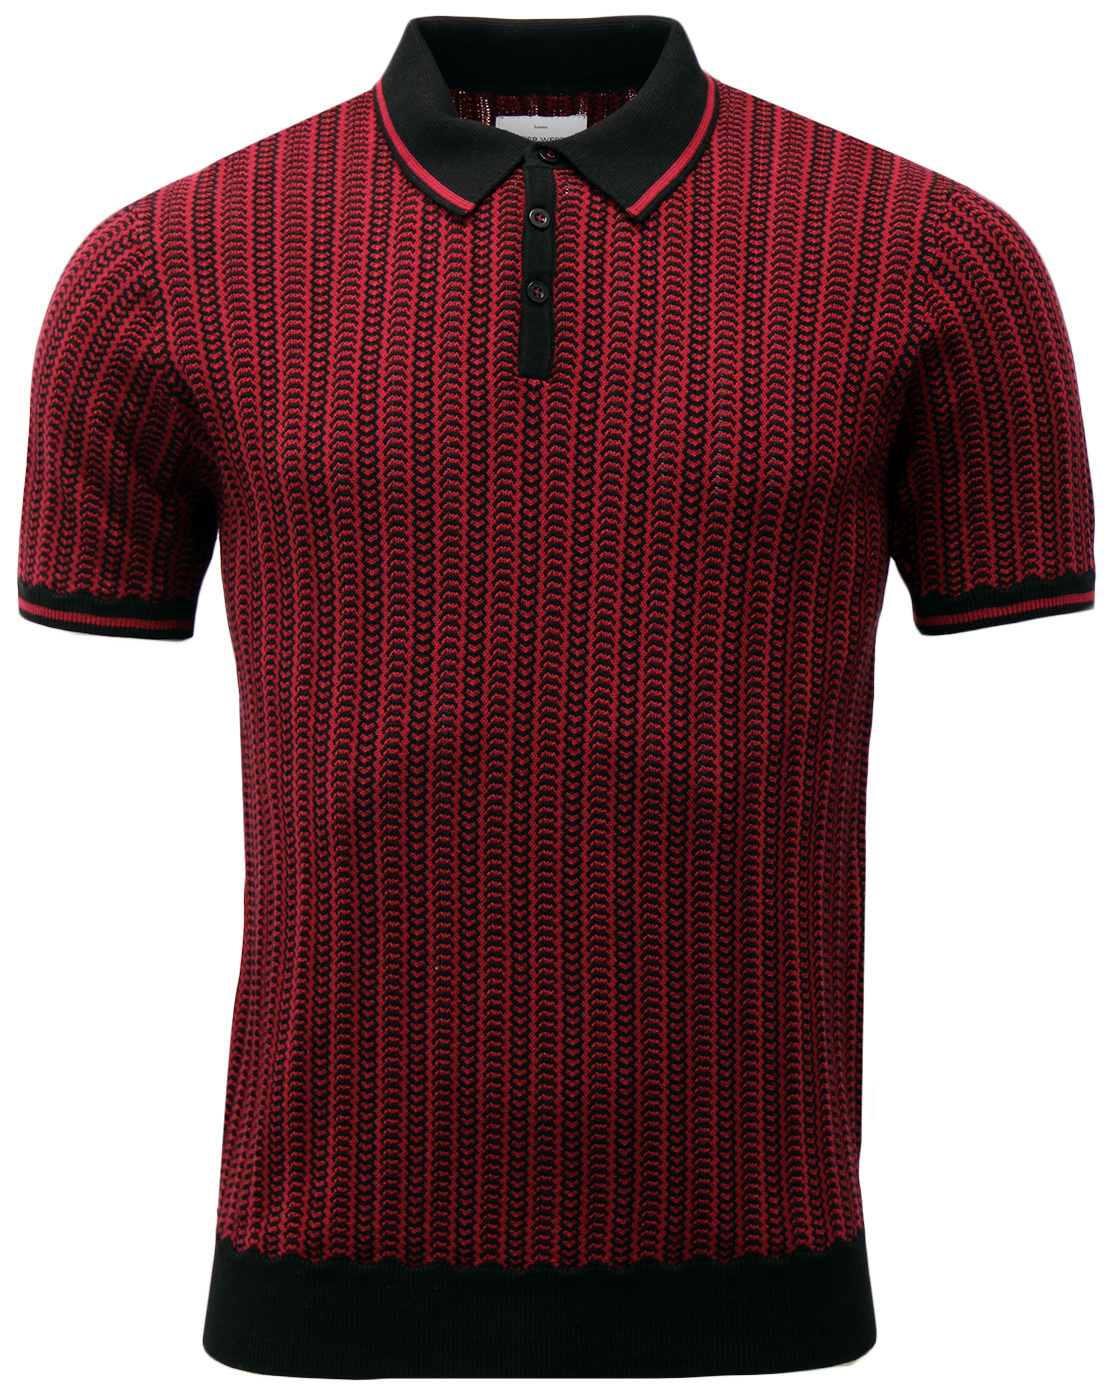 Naval PETER WERTH Mod Two Tone Chain Knitted Polo